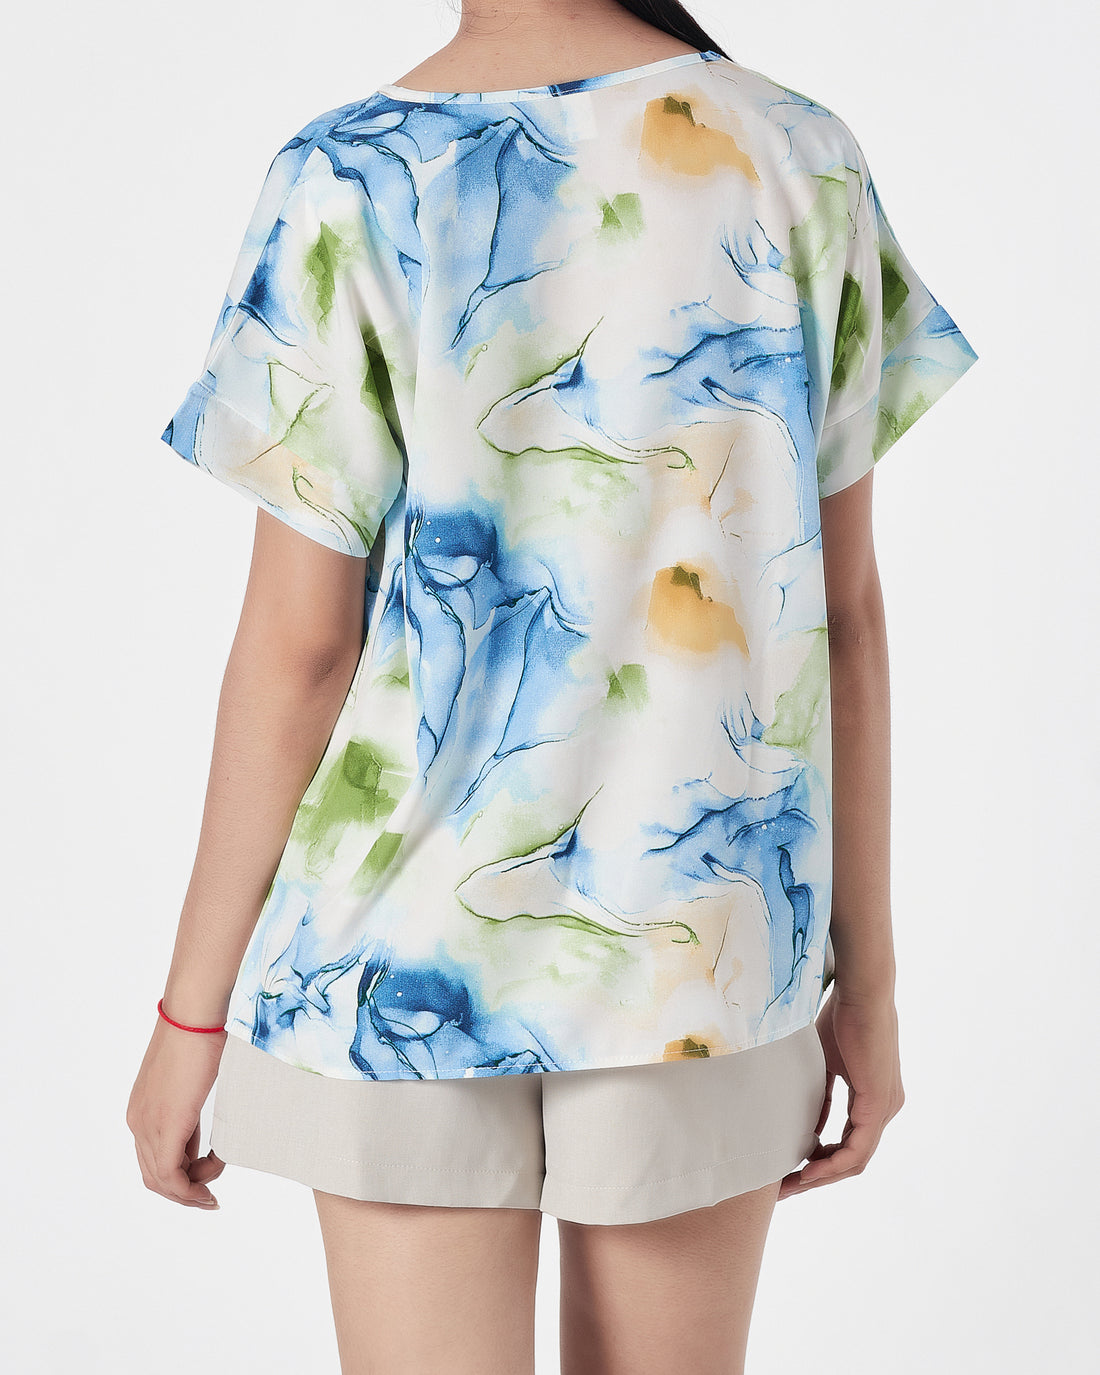 Floral Over Printed Lady  Shirts Short Sleeve 12.90